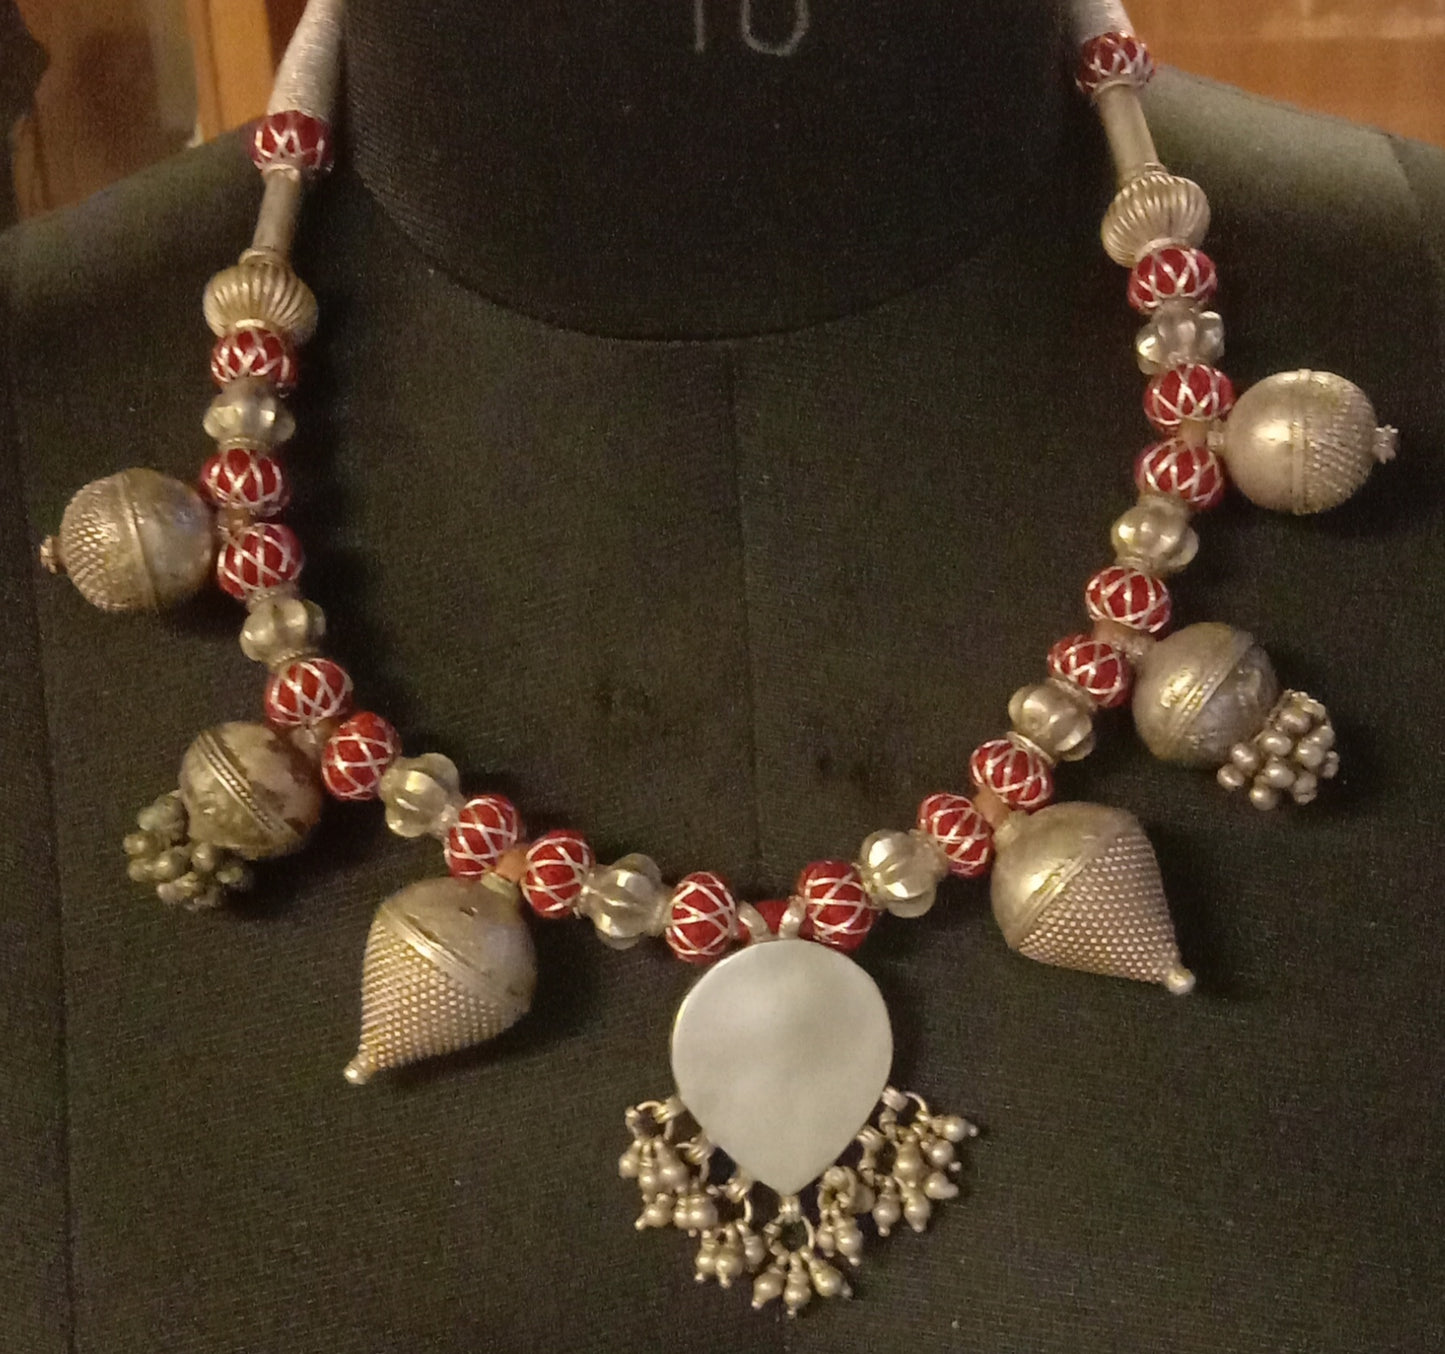 Made up tribal Necklace